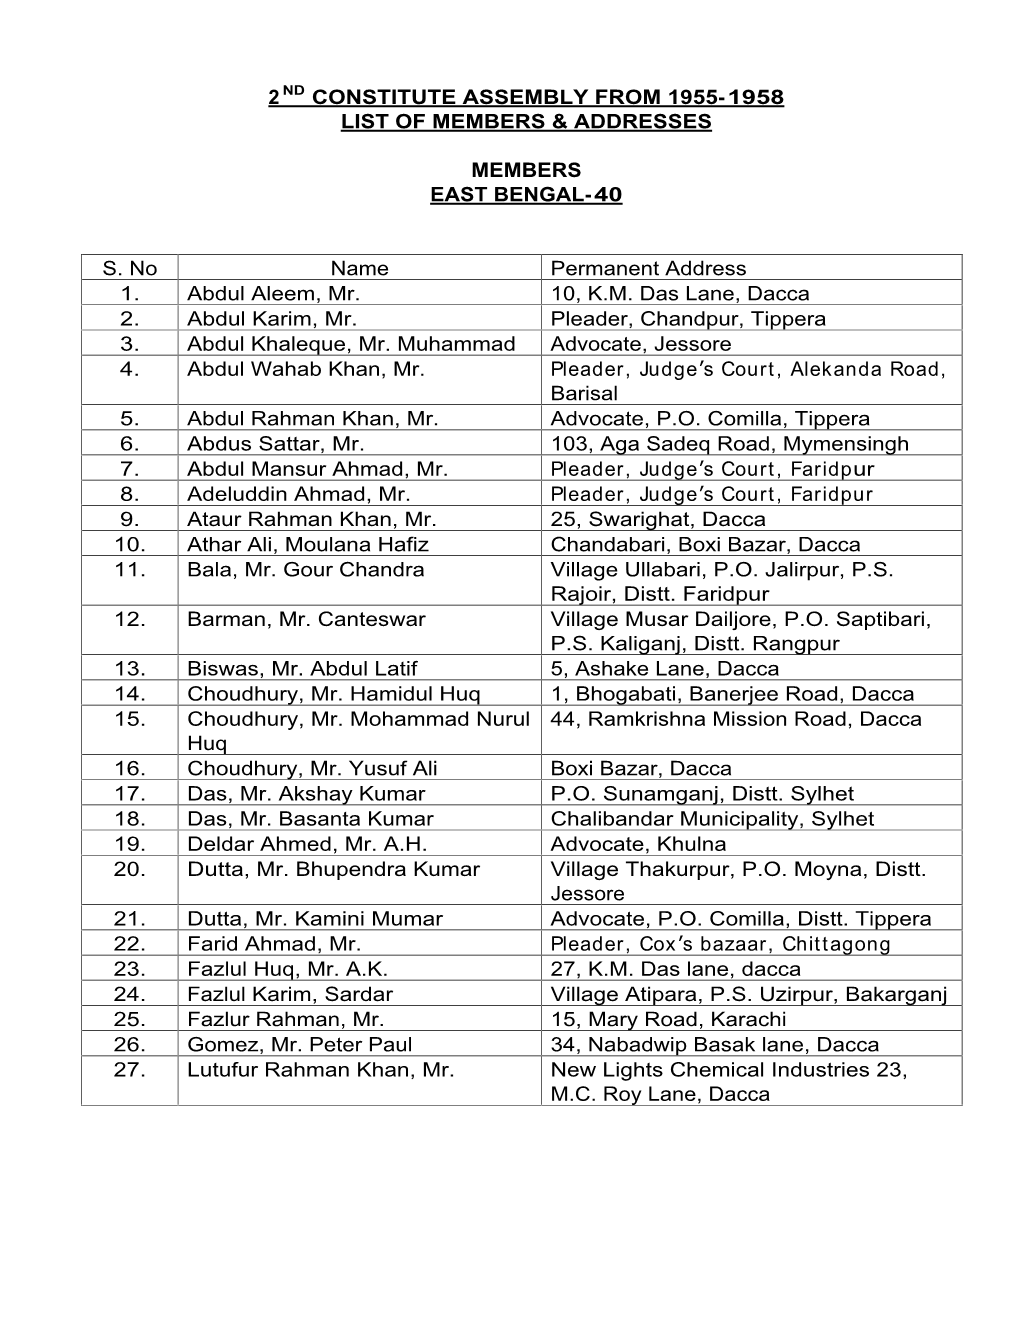 2Nd Constitute Assembly from 1955-1958 List Of